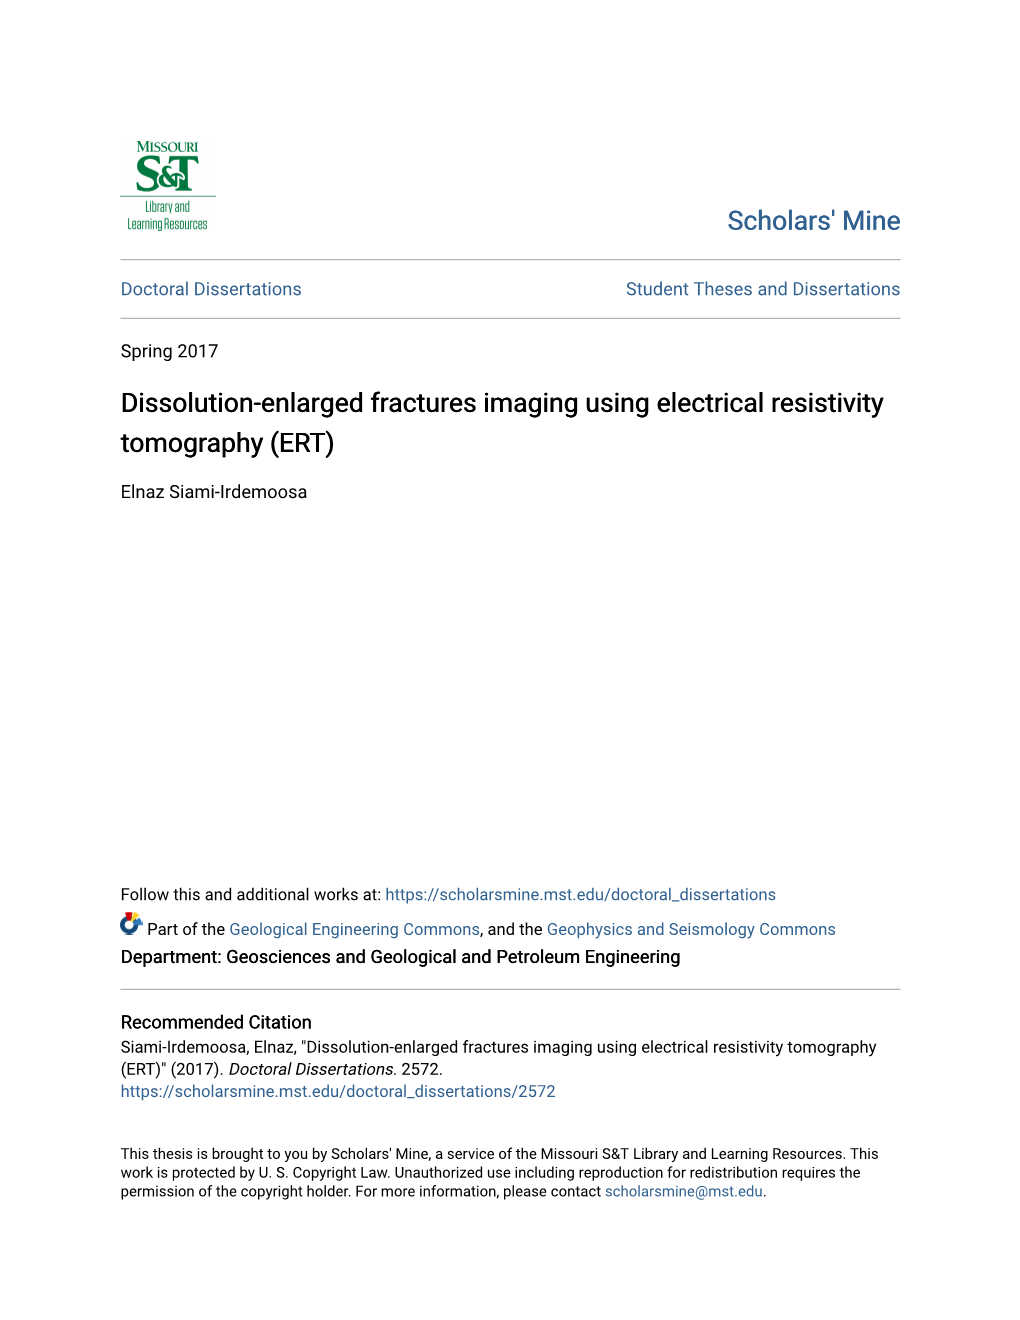 Dissolution-Enlarged Fractures Imaging Using Electrical Resistivity Tomography (ERT)